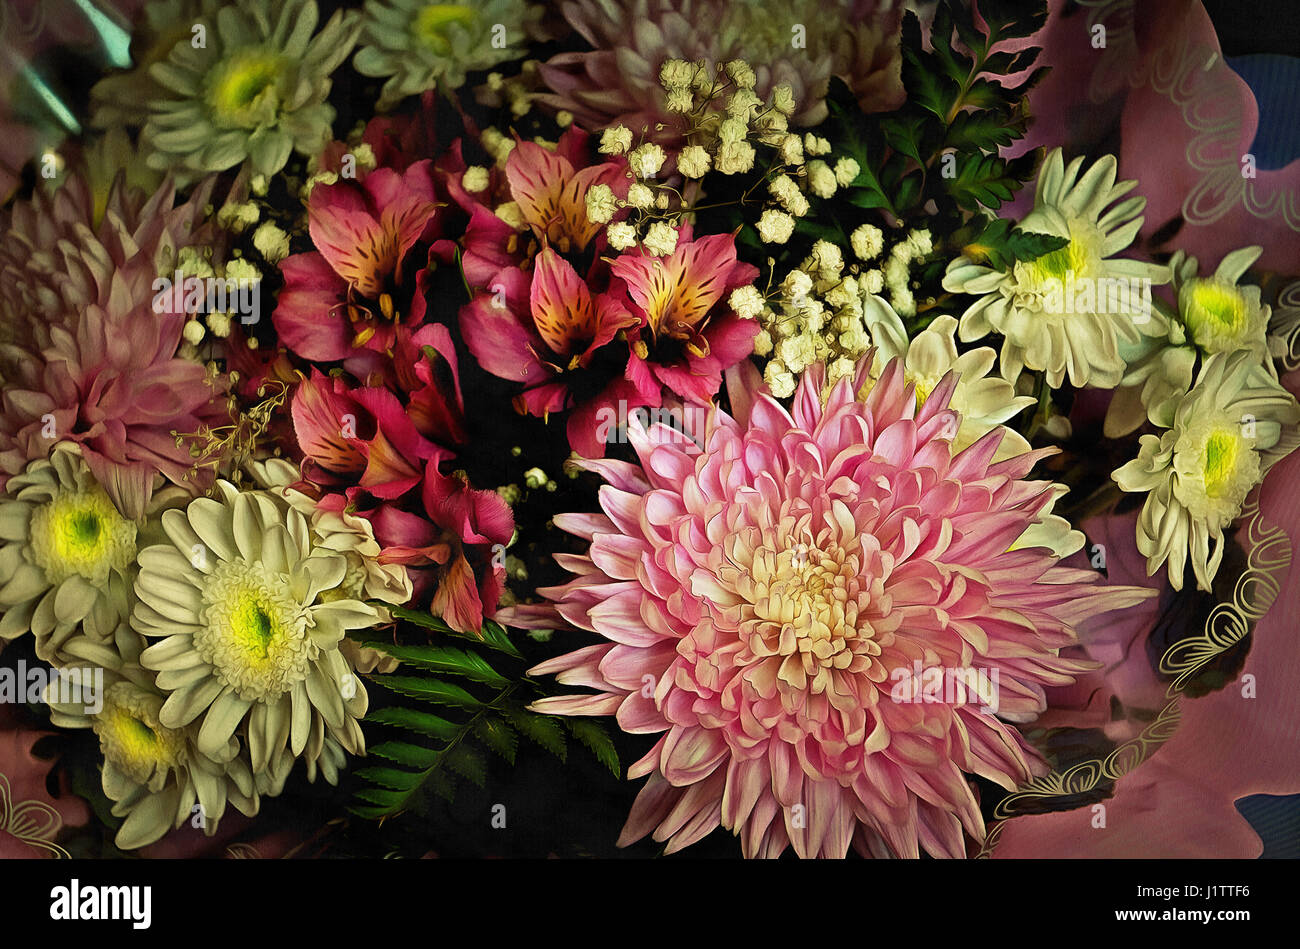 Chrysanthemum (Latin Chrysanthemum ) - genus of annual and perennial herbaceous plants in the family Asteraceae,Alstroemeria Stock Photo